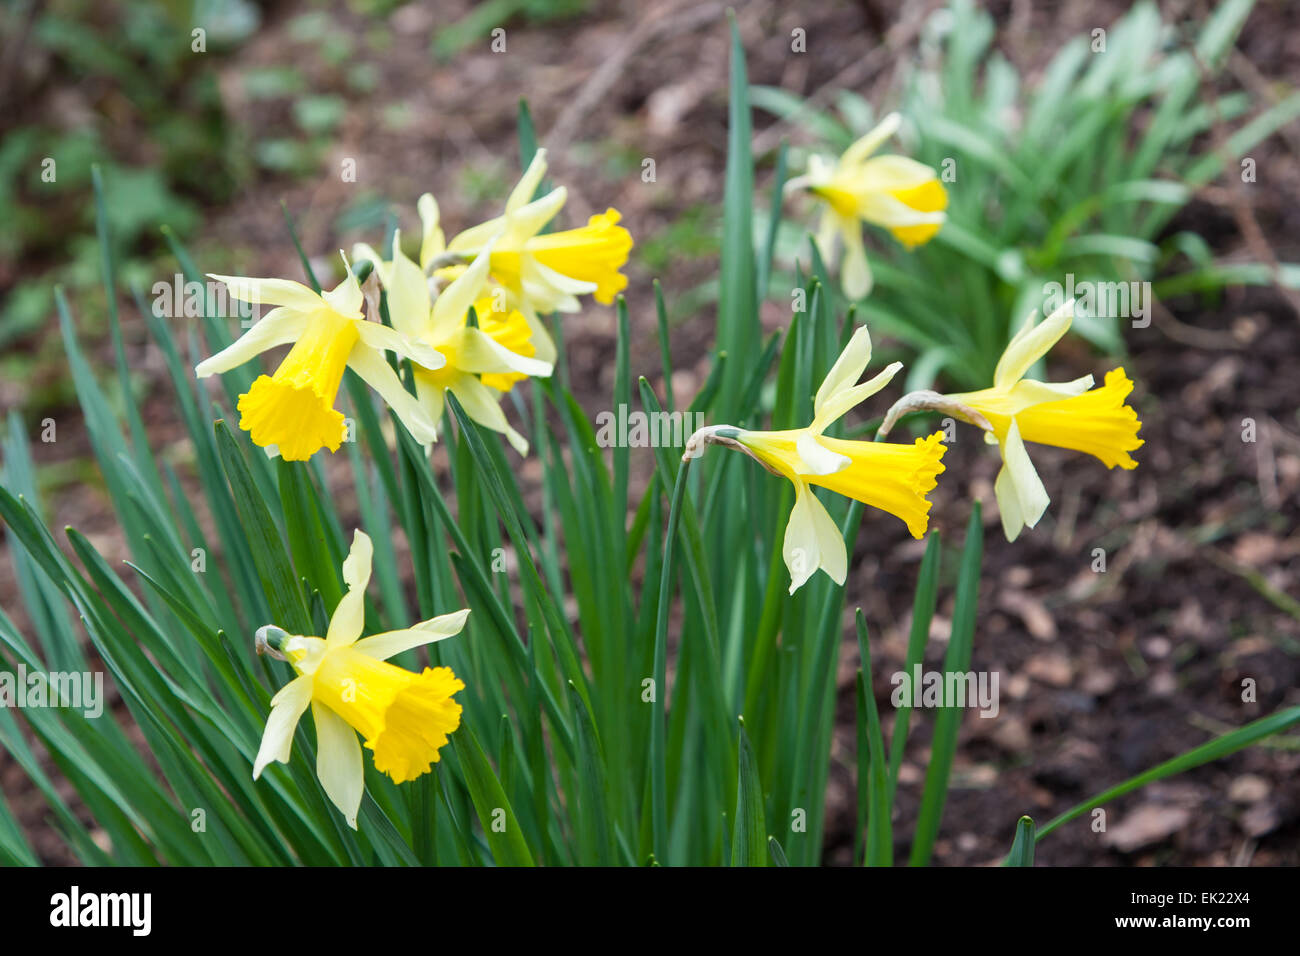 Liverpool, UK. 05th Apr, 2015. Easter Bank Holiday Weekend Spring Flowers in bloom Daffodils Credit:  steven roe/Alamy Live News Stock Photo